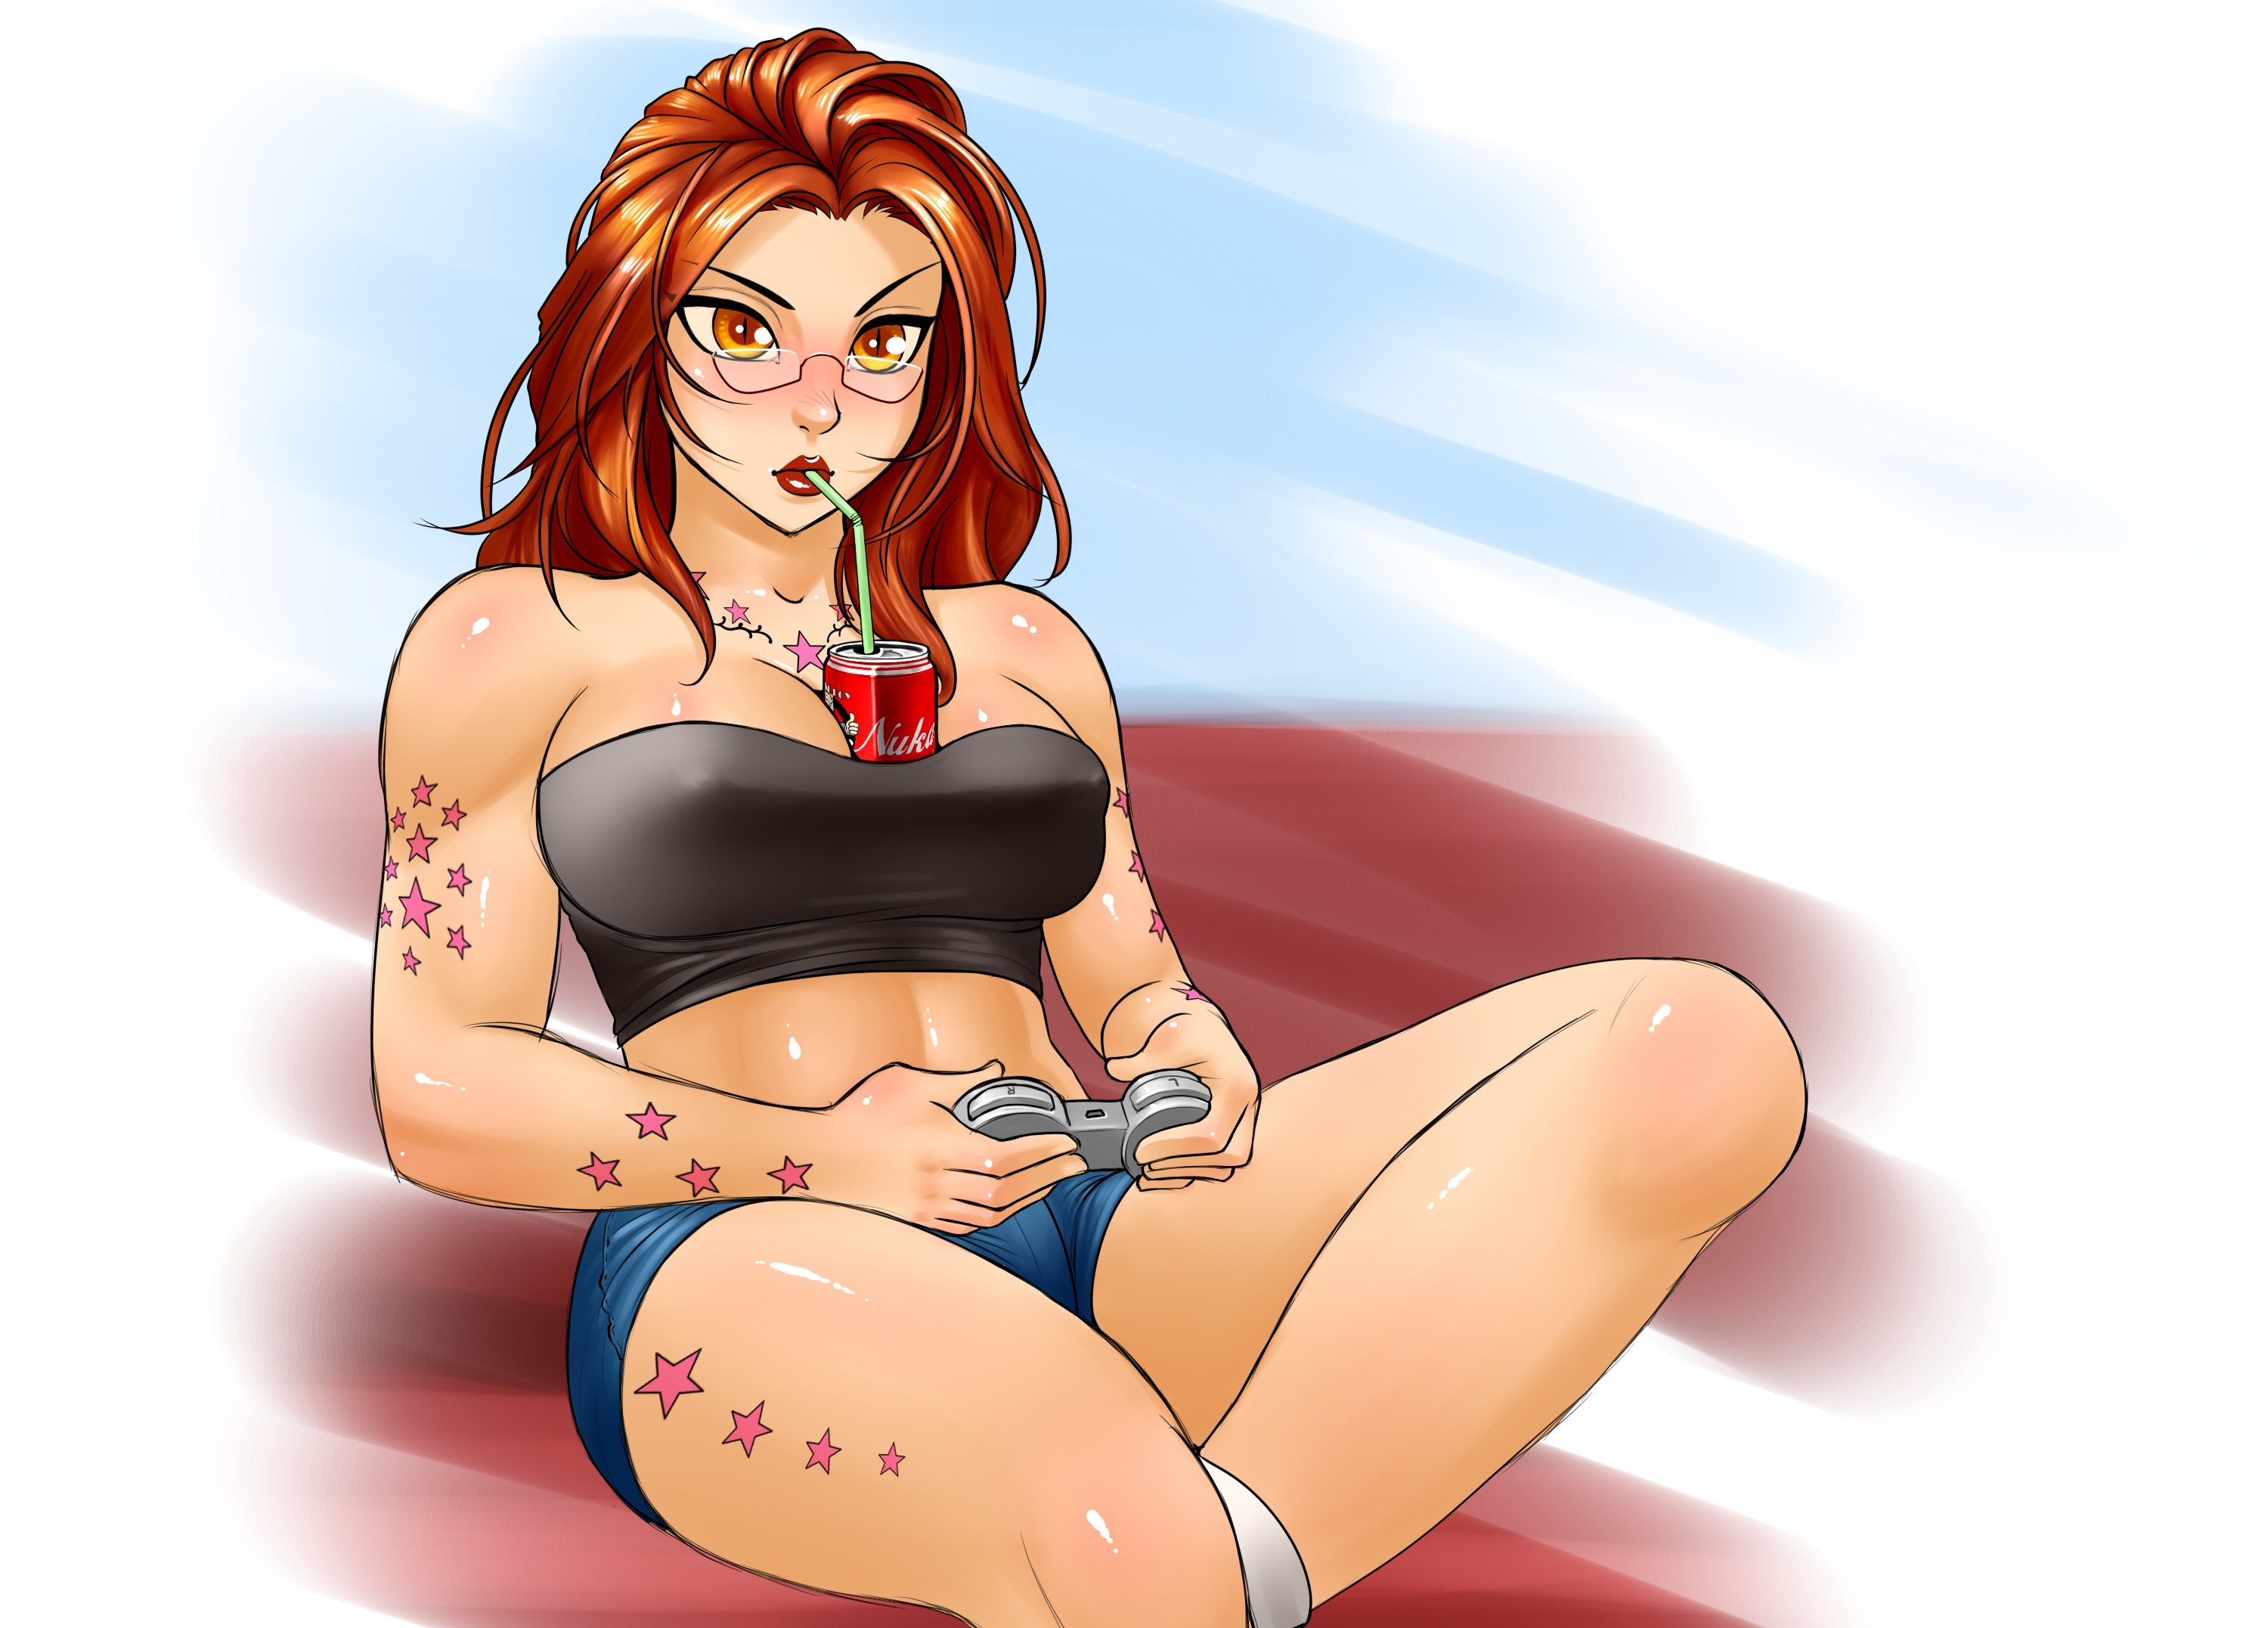 General 3000x2153 artwork big boobs controllers boobs red lipstick tattoo RoninDude redhead simple background gamer can item between boobs legs bare shoulders minimalism long hair